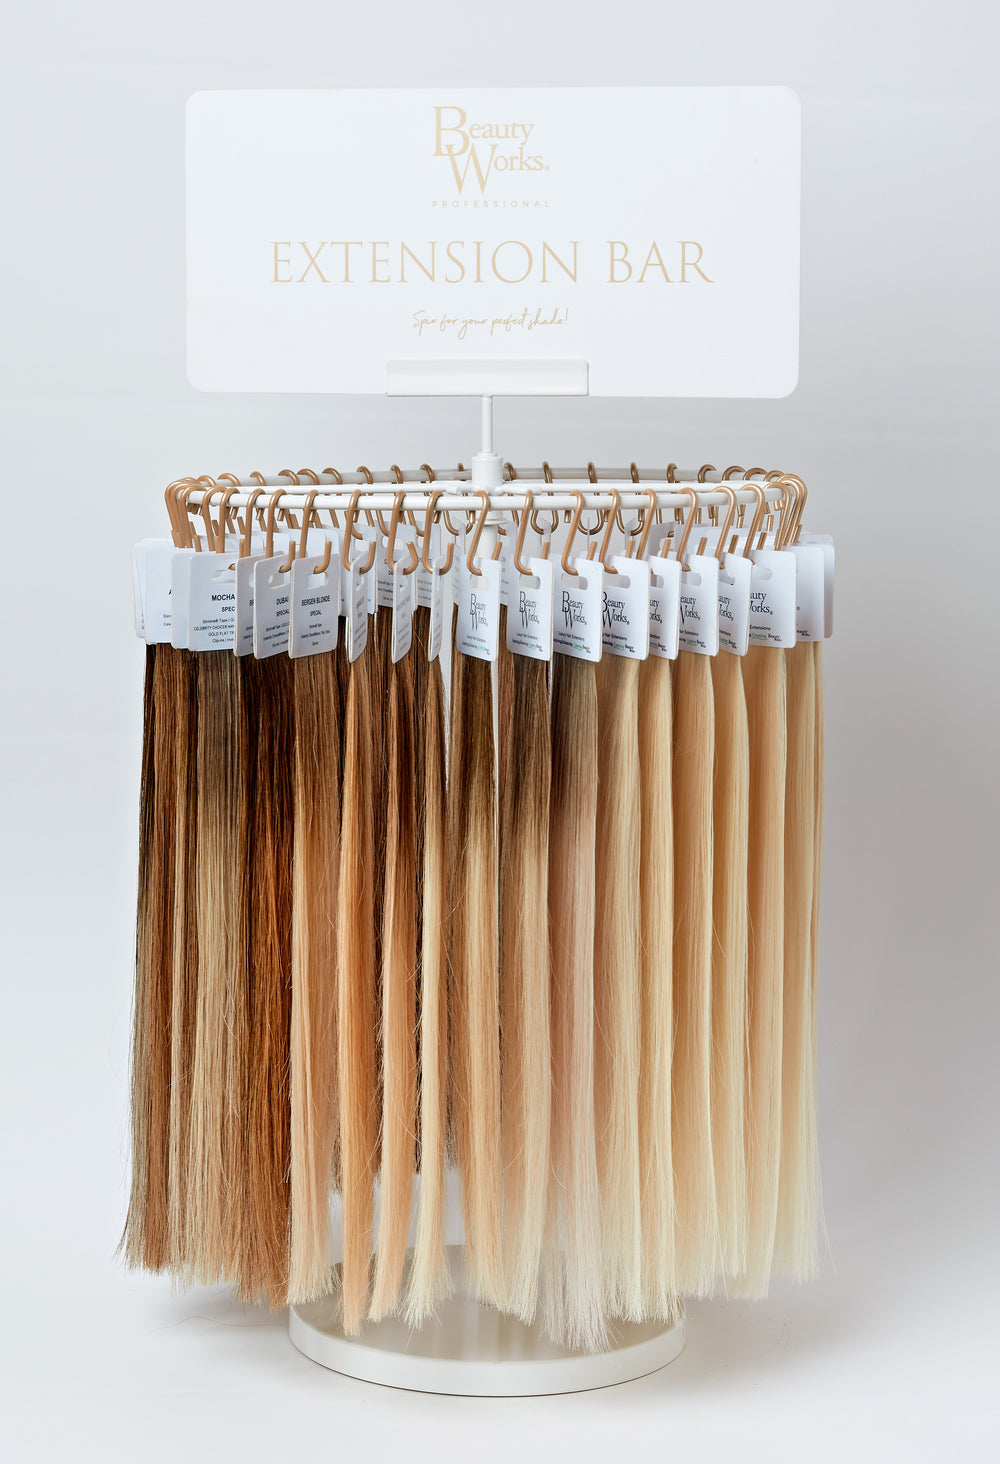 Beauty Works Hair Extension Bar (swatches not included)